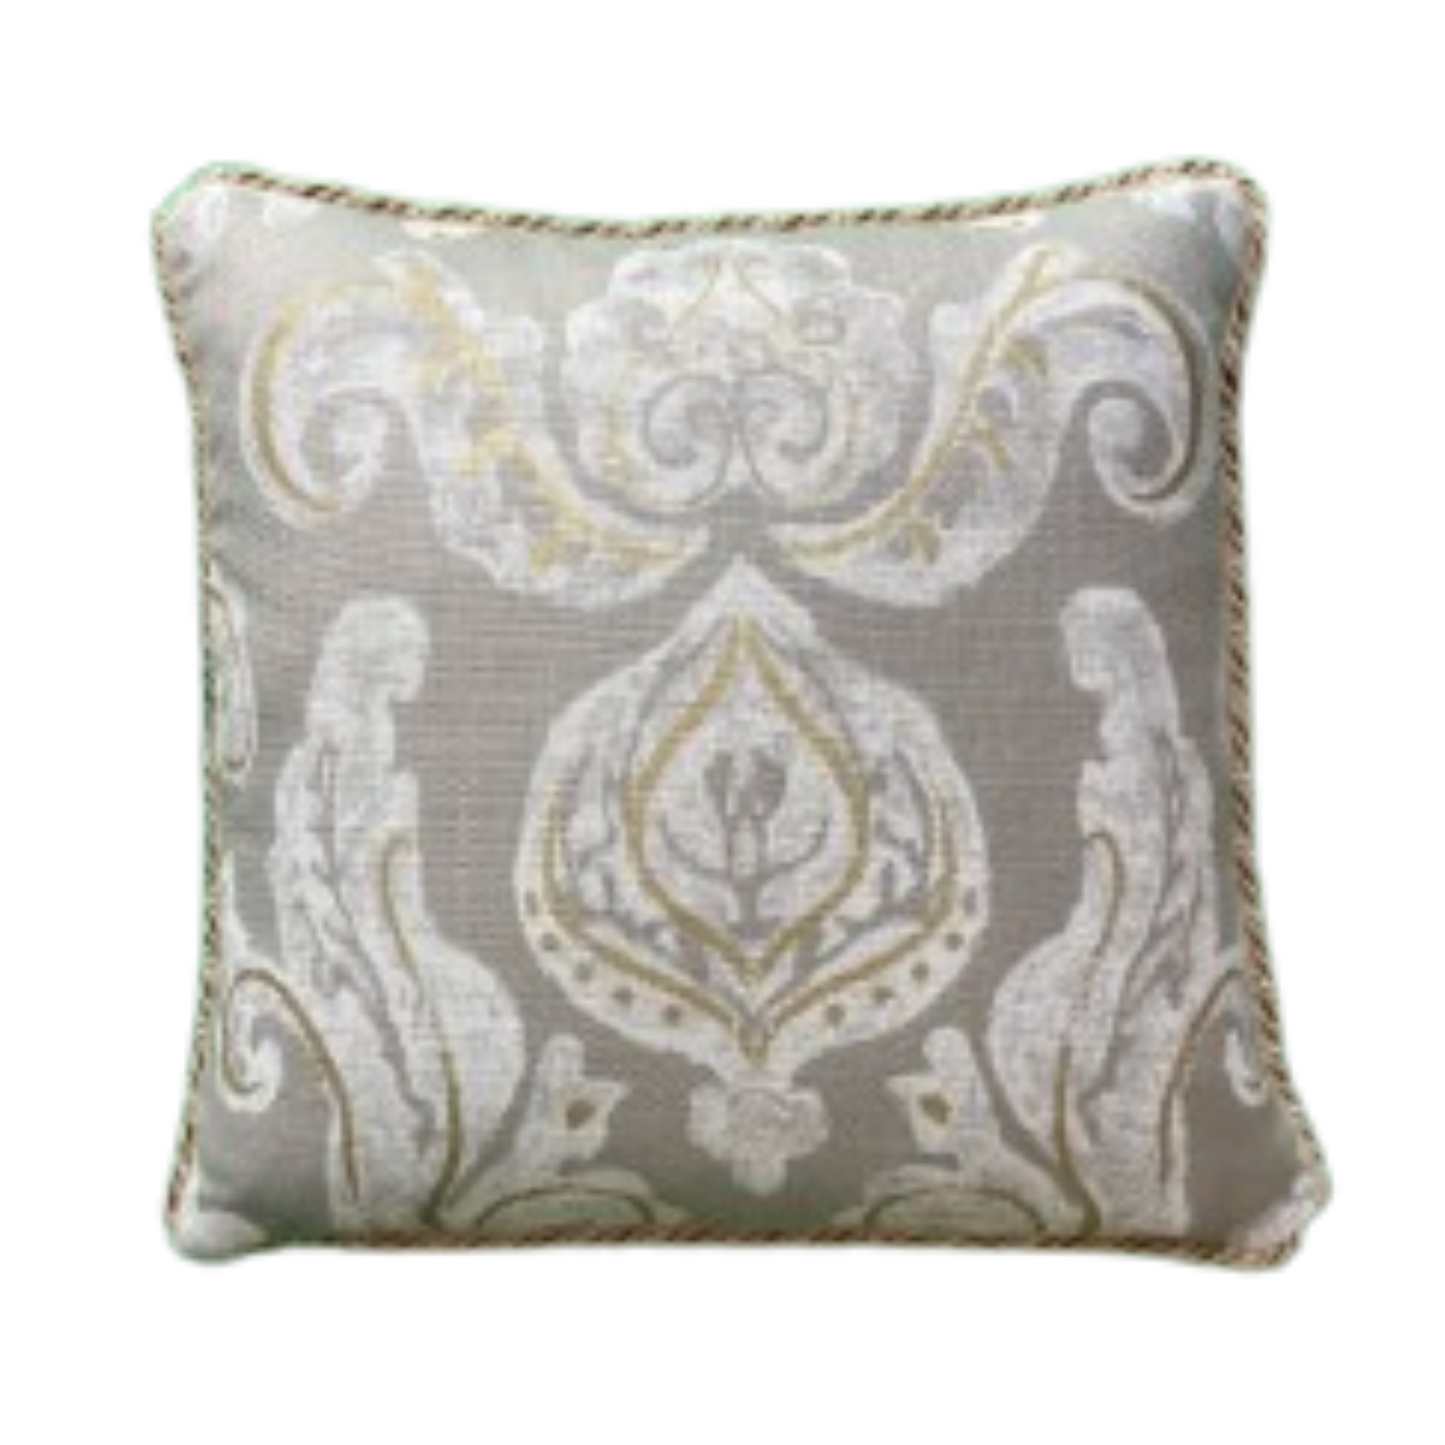 Brocatello Glam Damask 18 x 18 Square Designer Pillow with Down Feather Insert